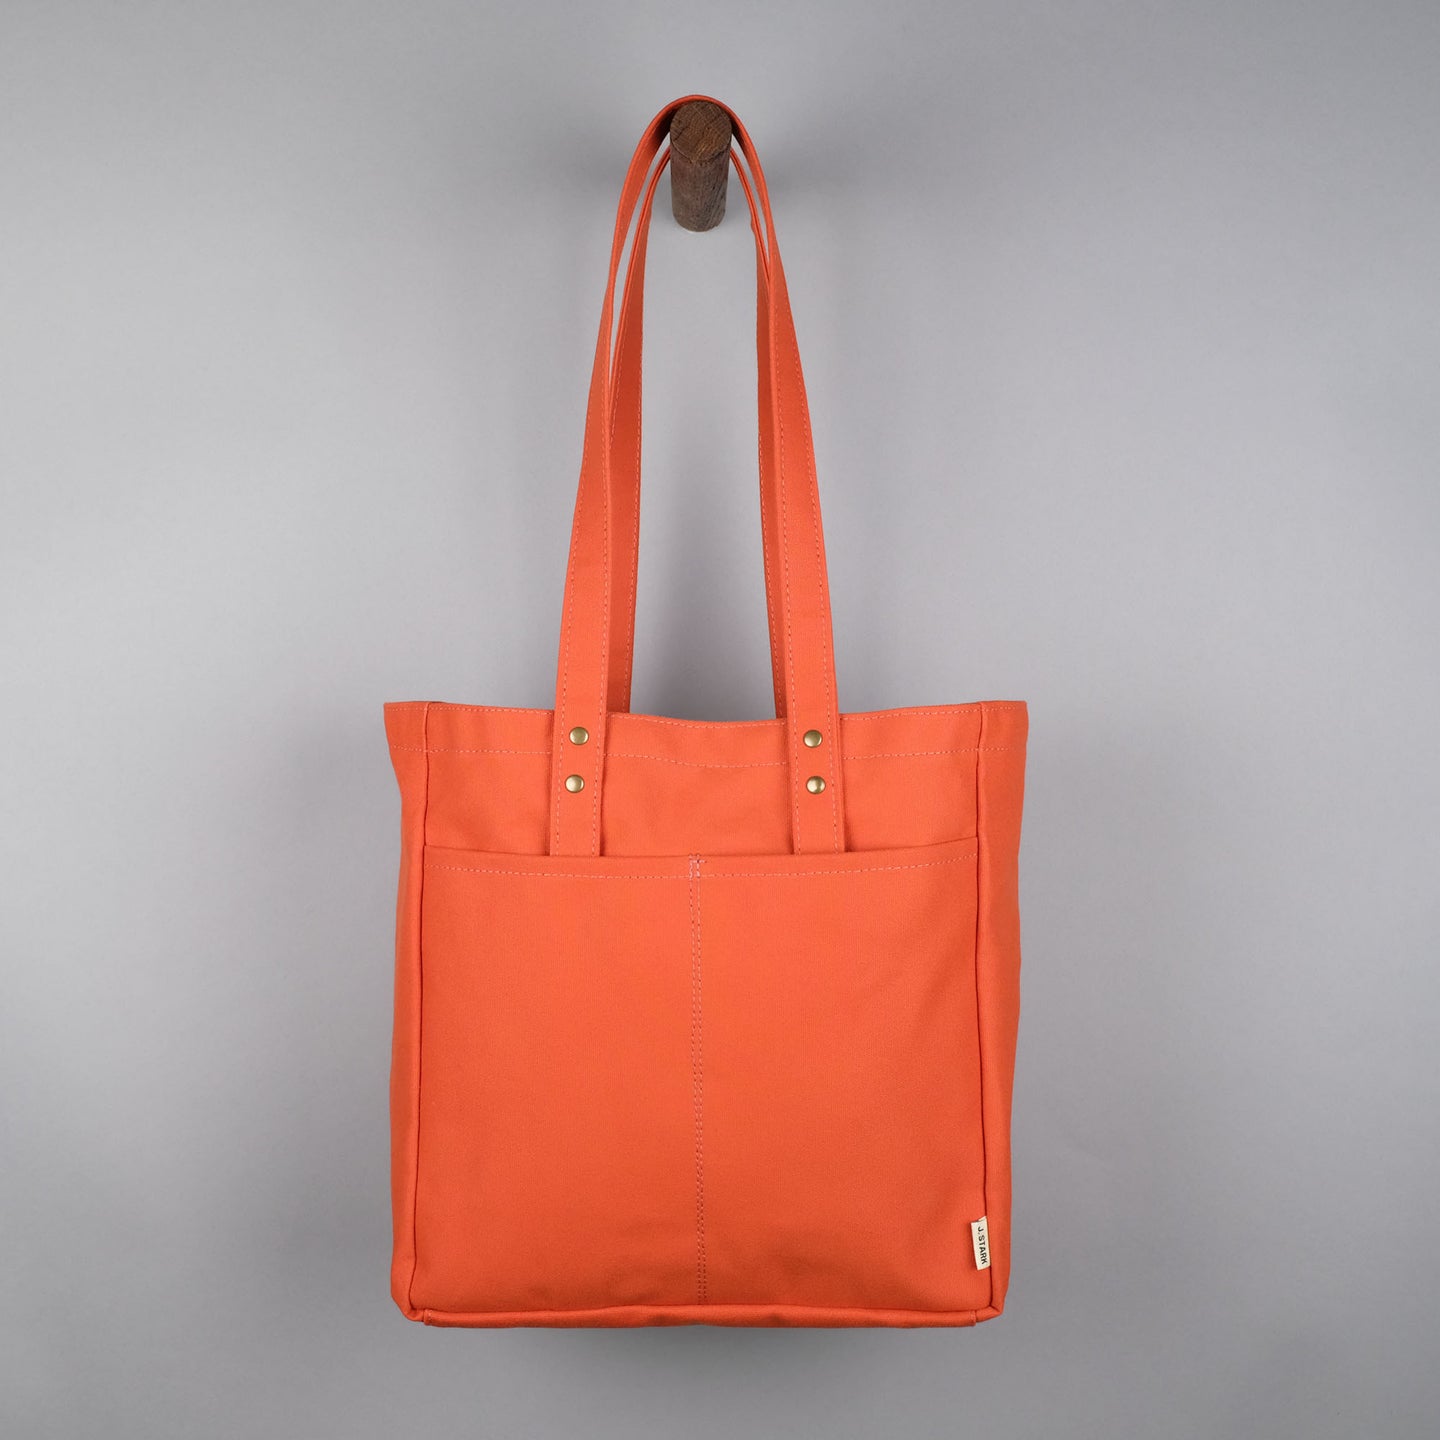 How to Make the Perfect Everyday Tote Bag